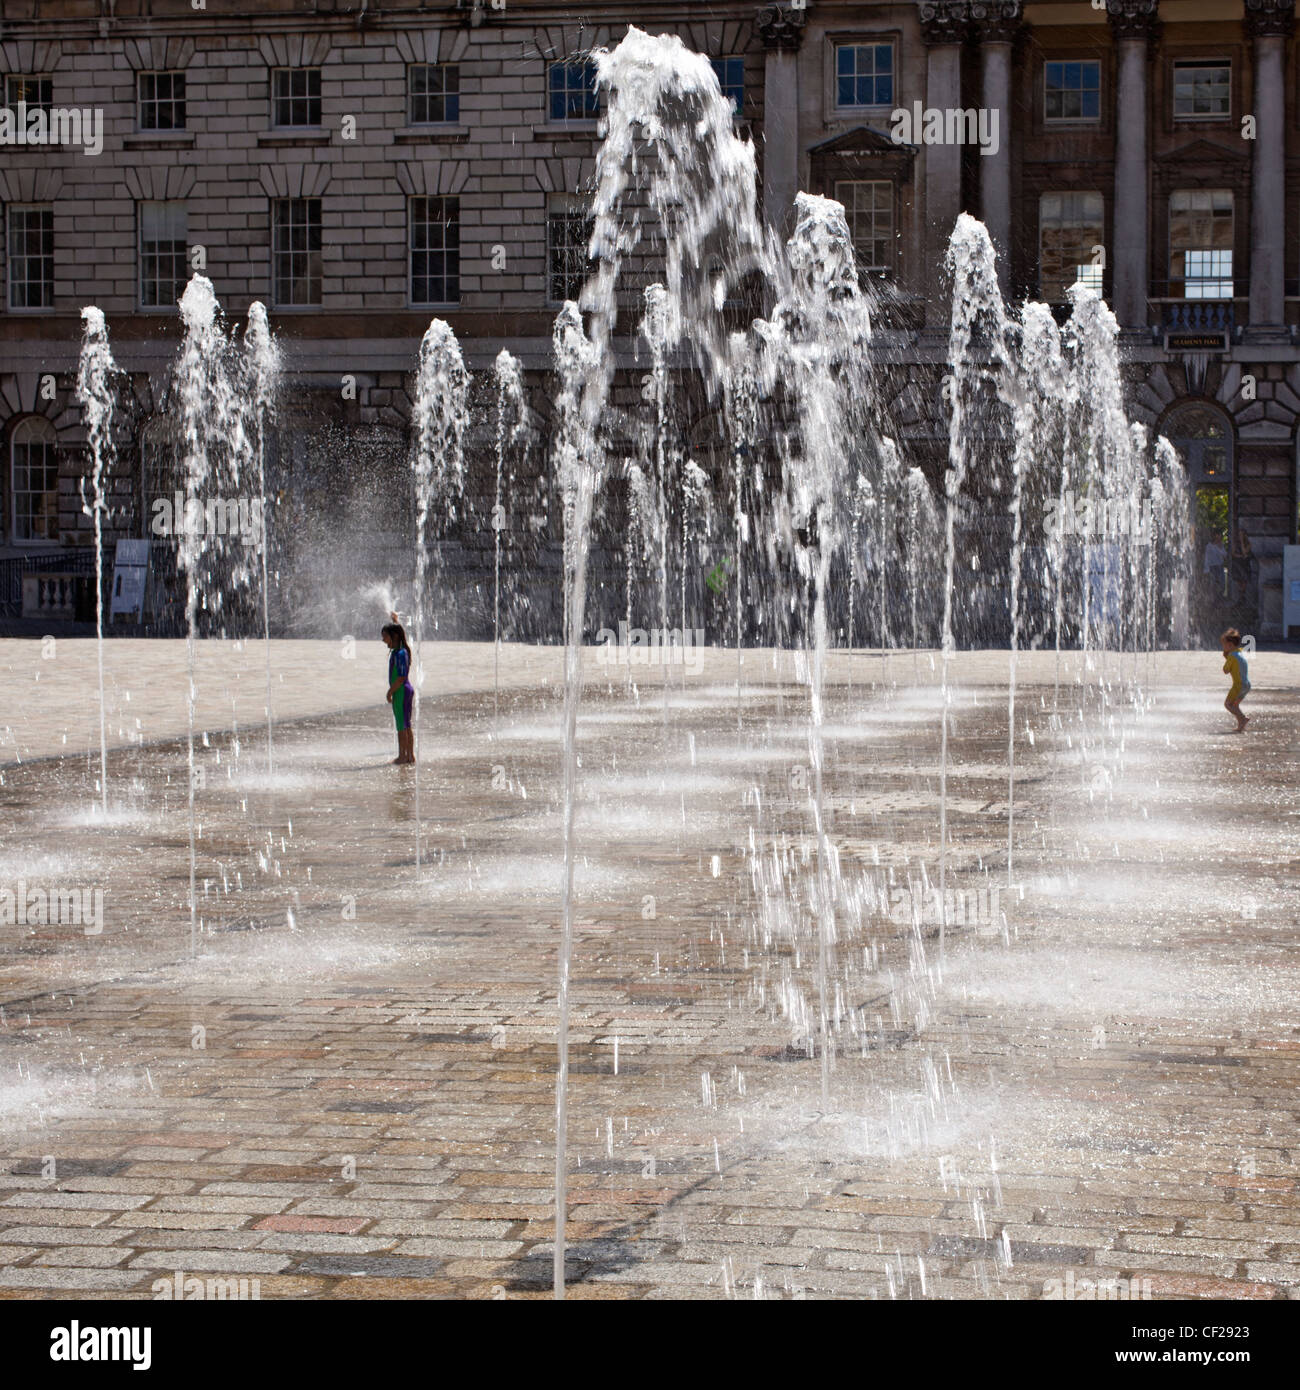 Children standing under fountains in the Edmond J. Safra Fountain Court at Somerset House. Stock Photo